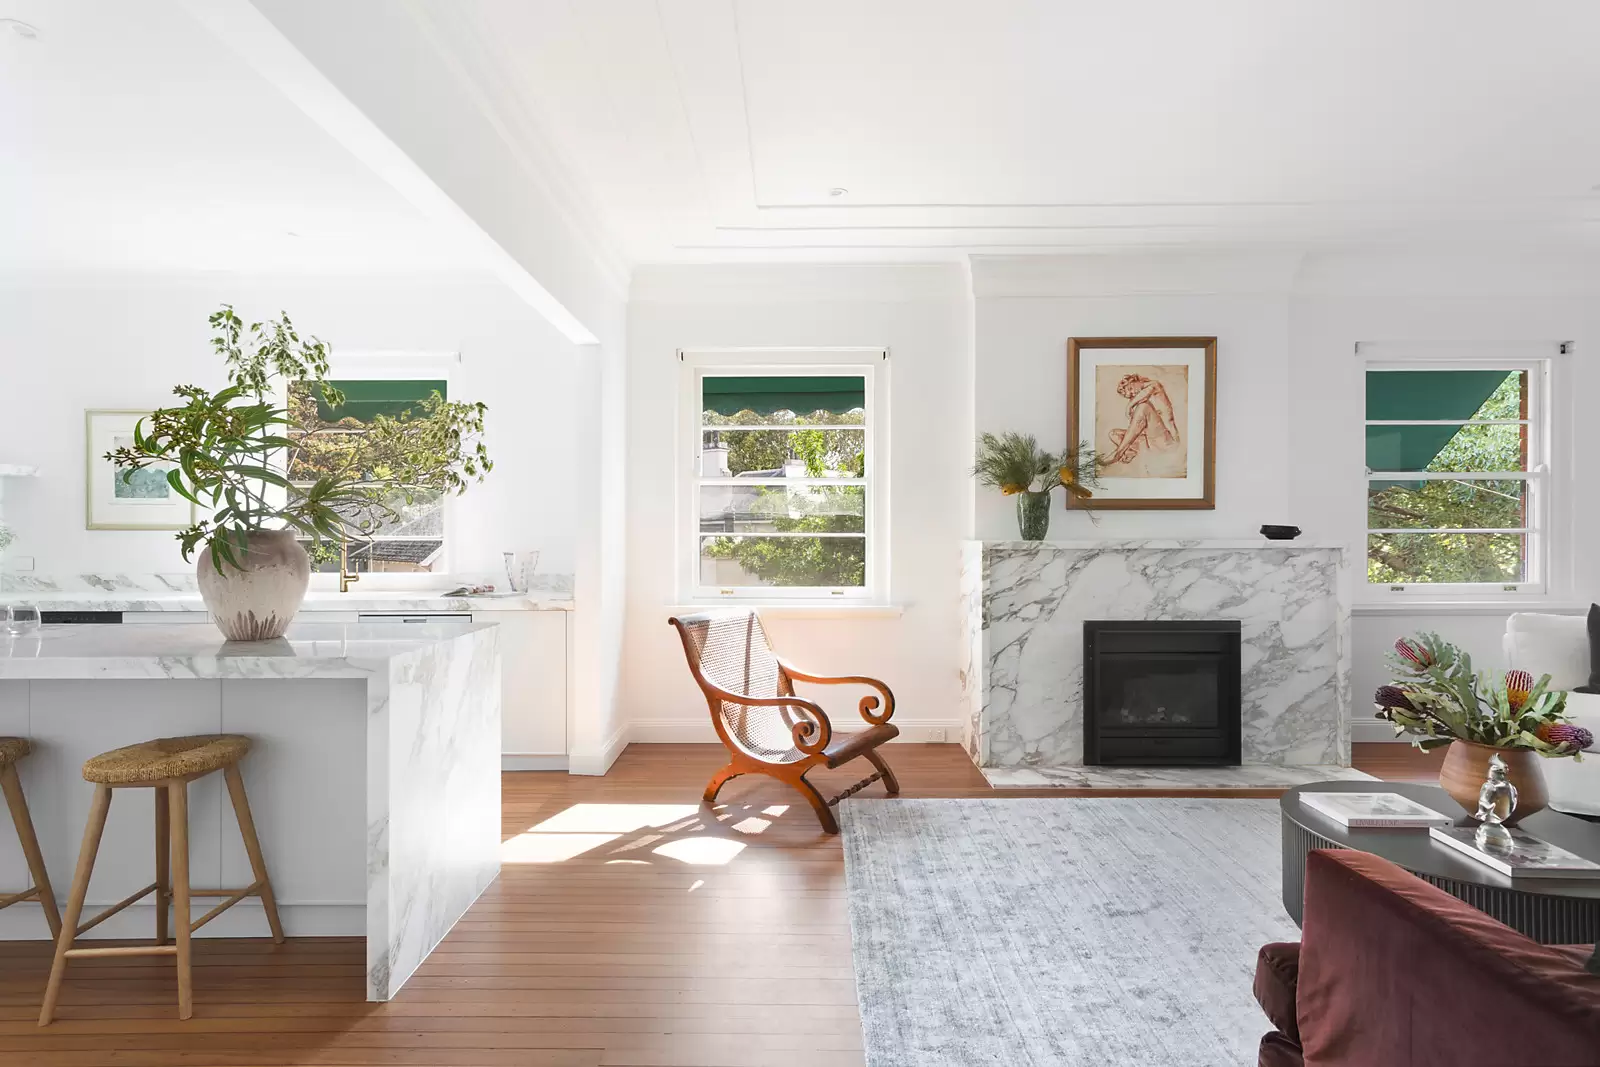 5/12 Rosemont Avenue, Woollahra Auction by Sydney Sotheby's International Realty - image 1